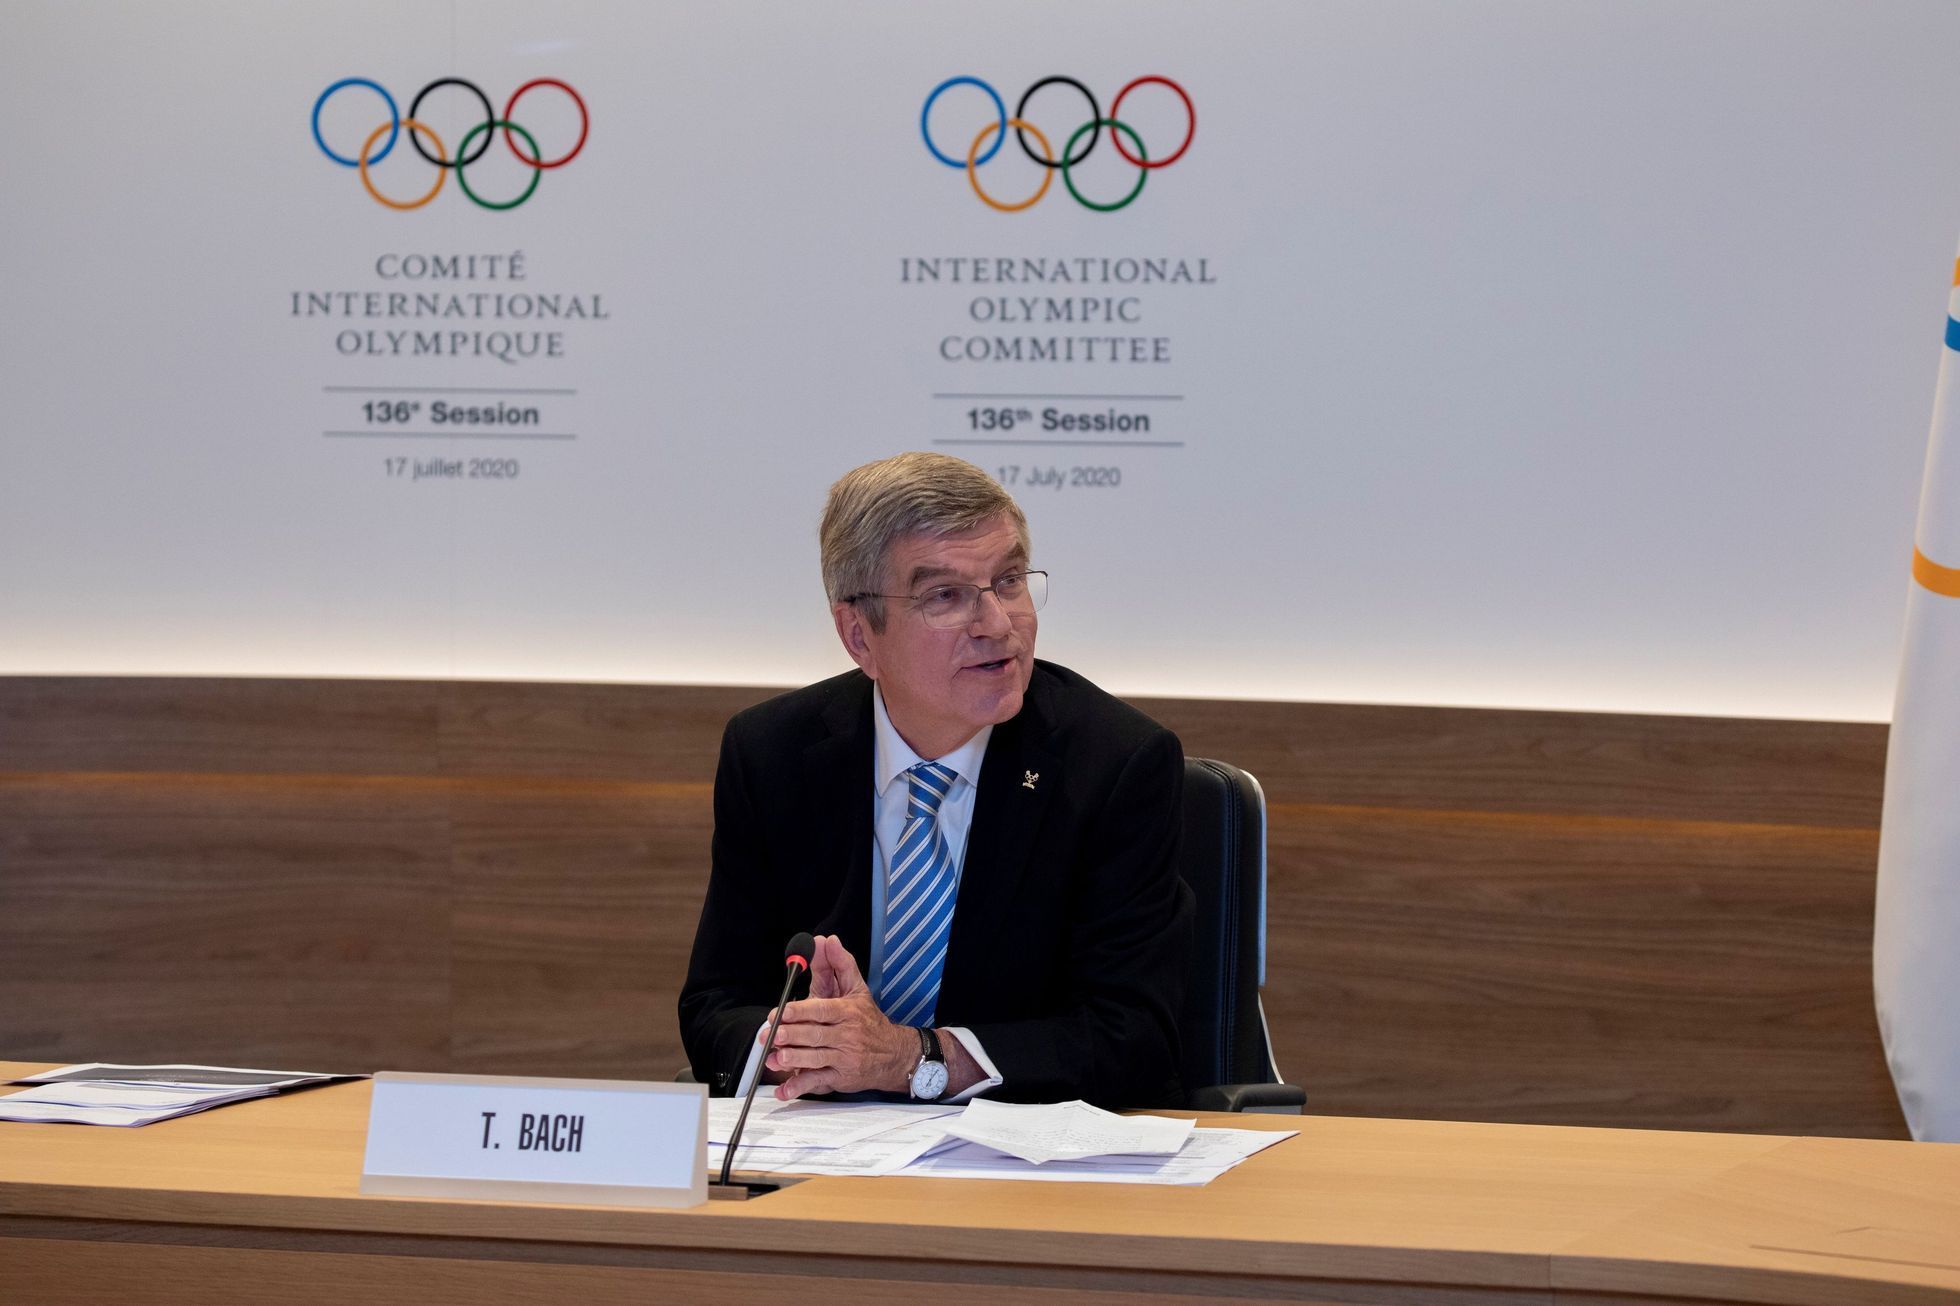 IOC President Bach hosts the first ever remote IOC Session in Lausanne